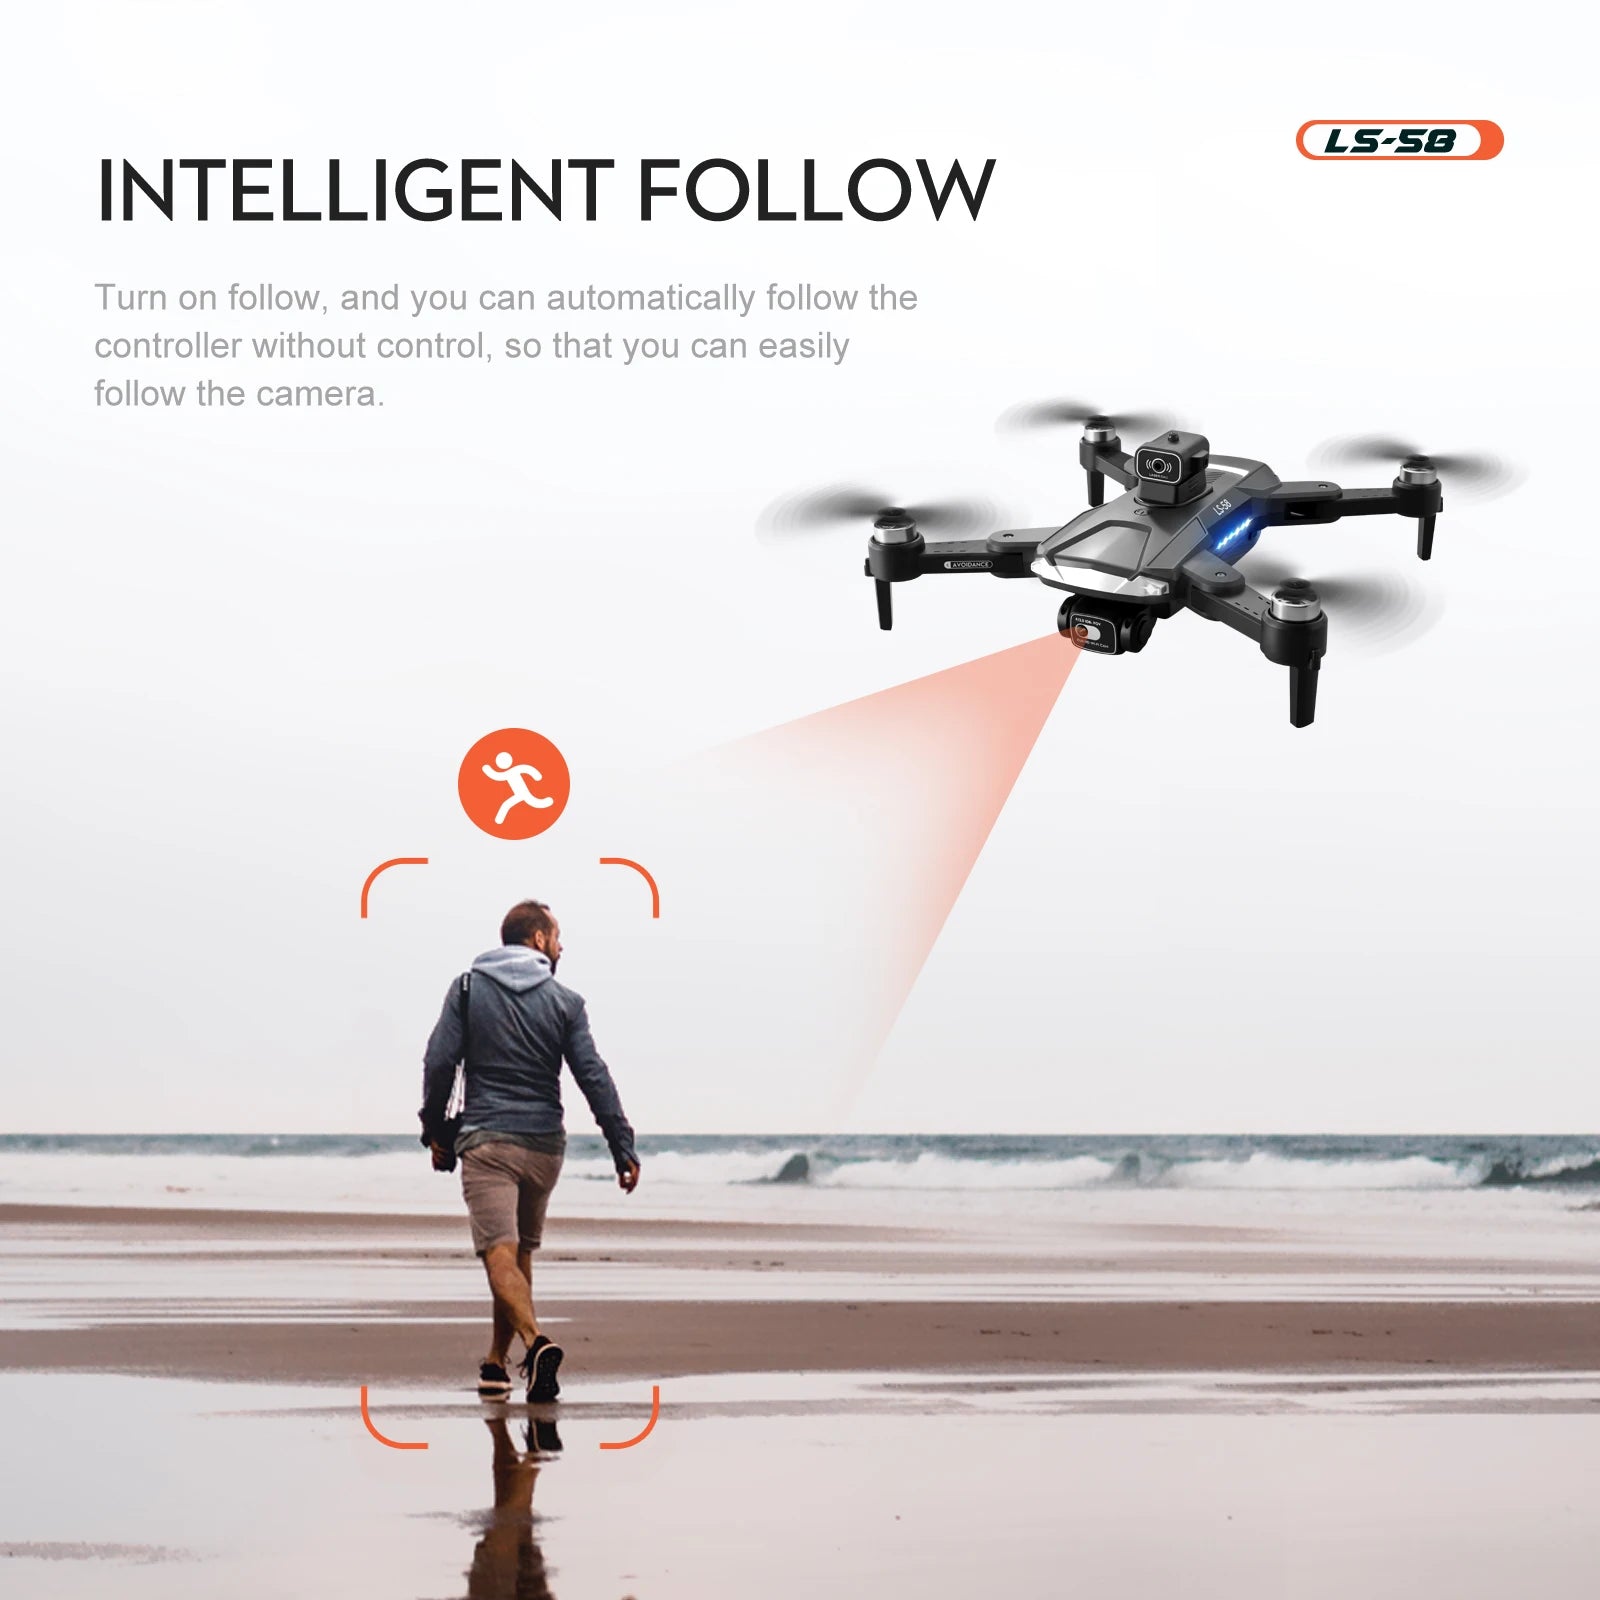 LS58 Drone, ls-5o intelligent follow turn on follow; and you can